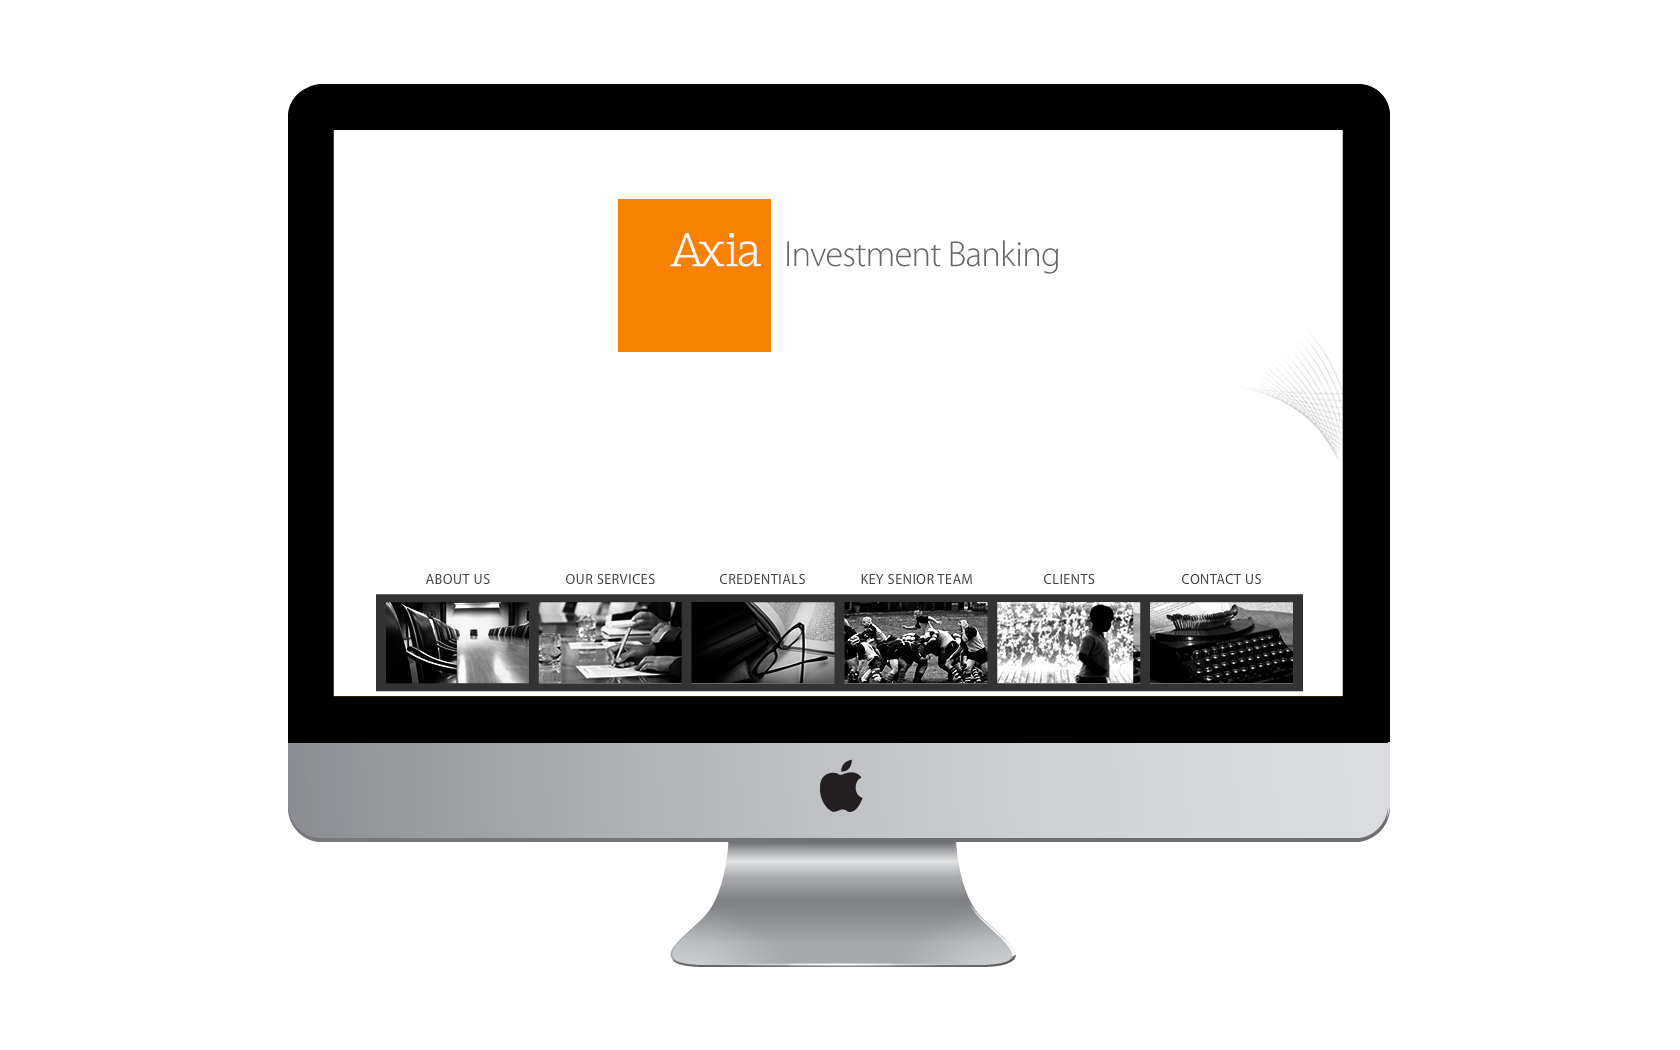 Axia Investment Banking